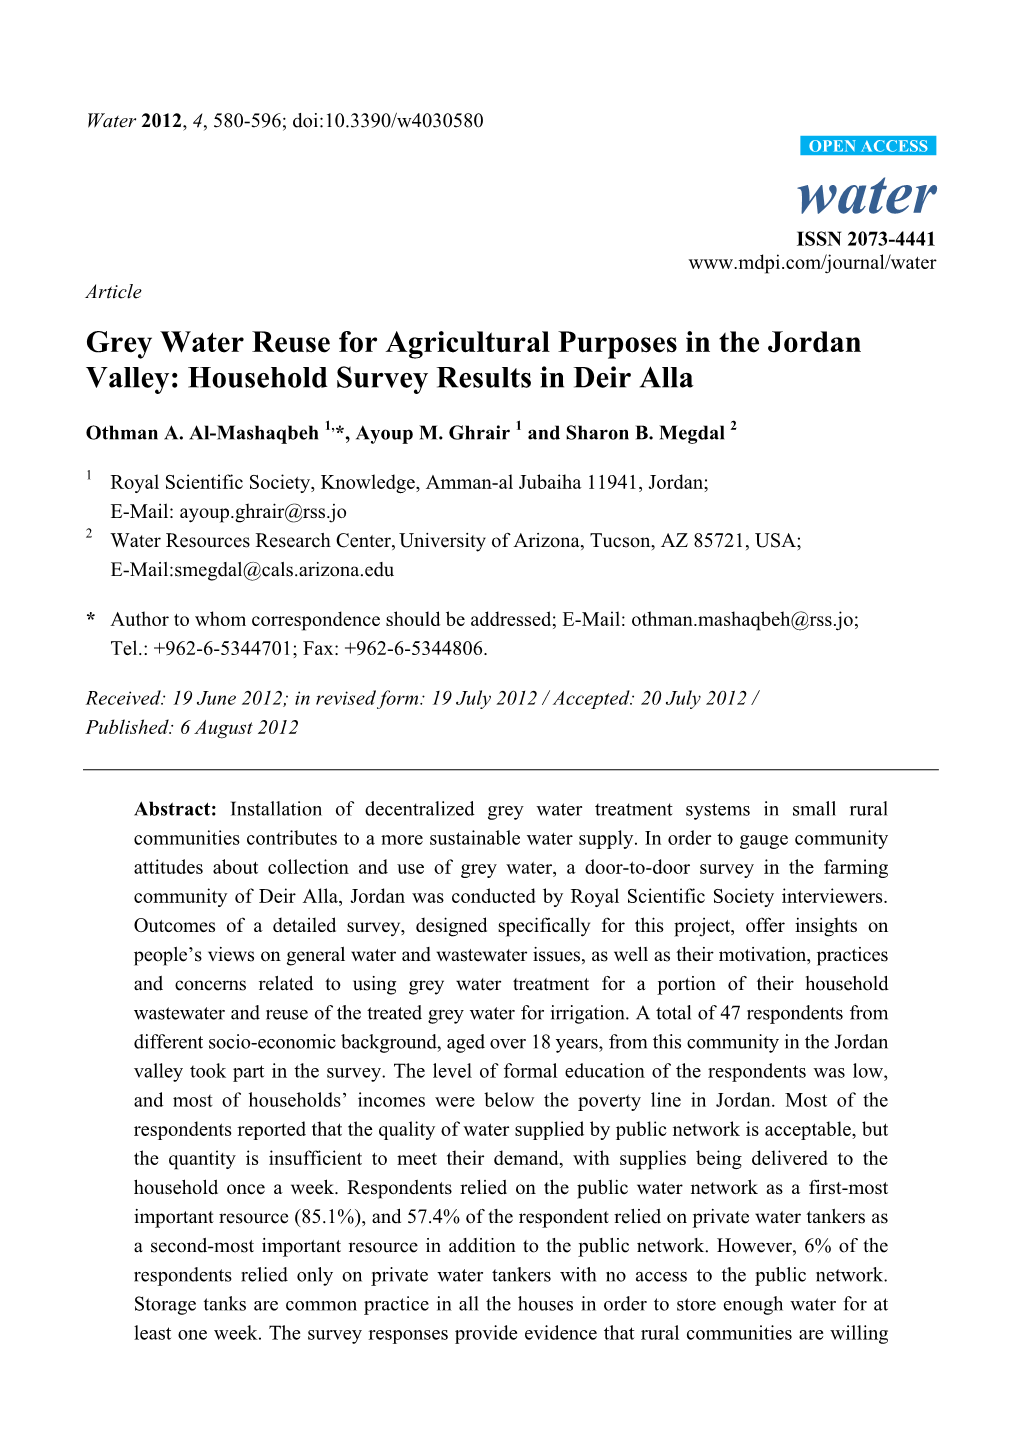 Grey Water Reuse for Agricultural Purposes in the Jordan Valley: Household Survey Results in Deir Alla